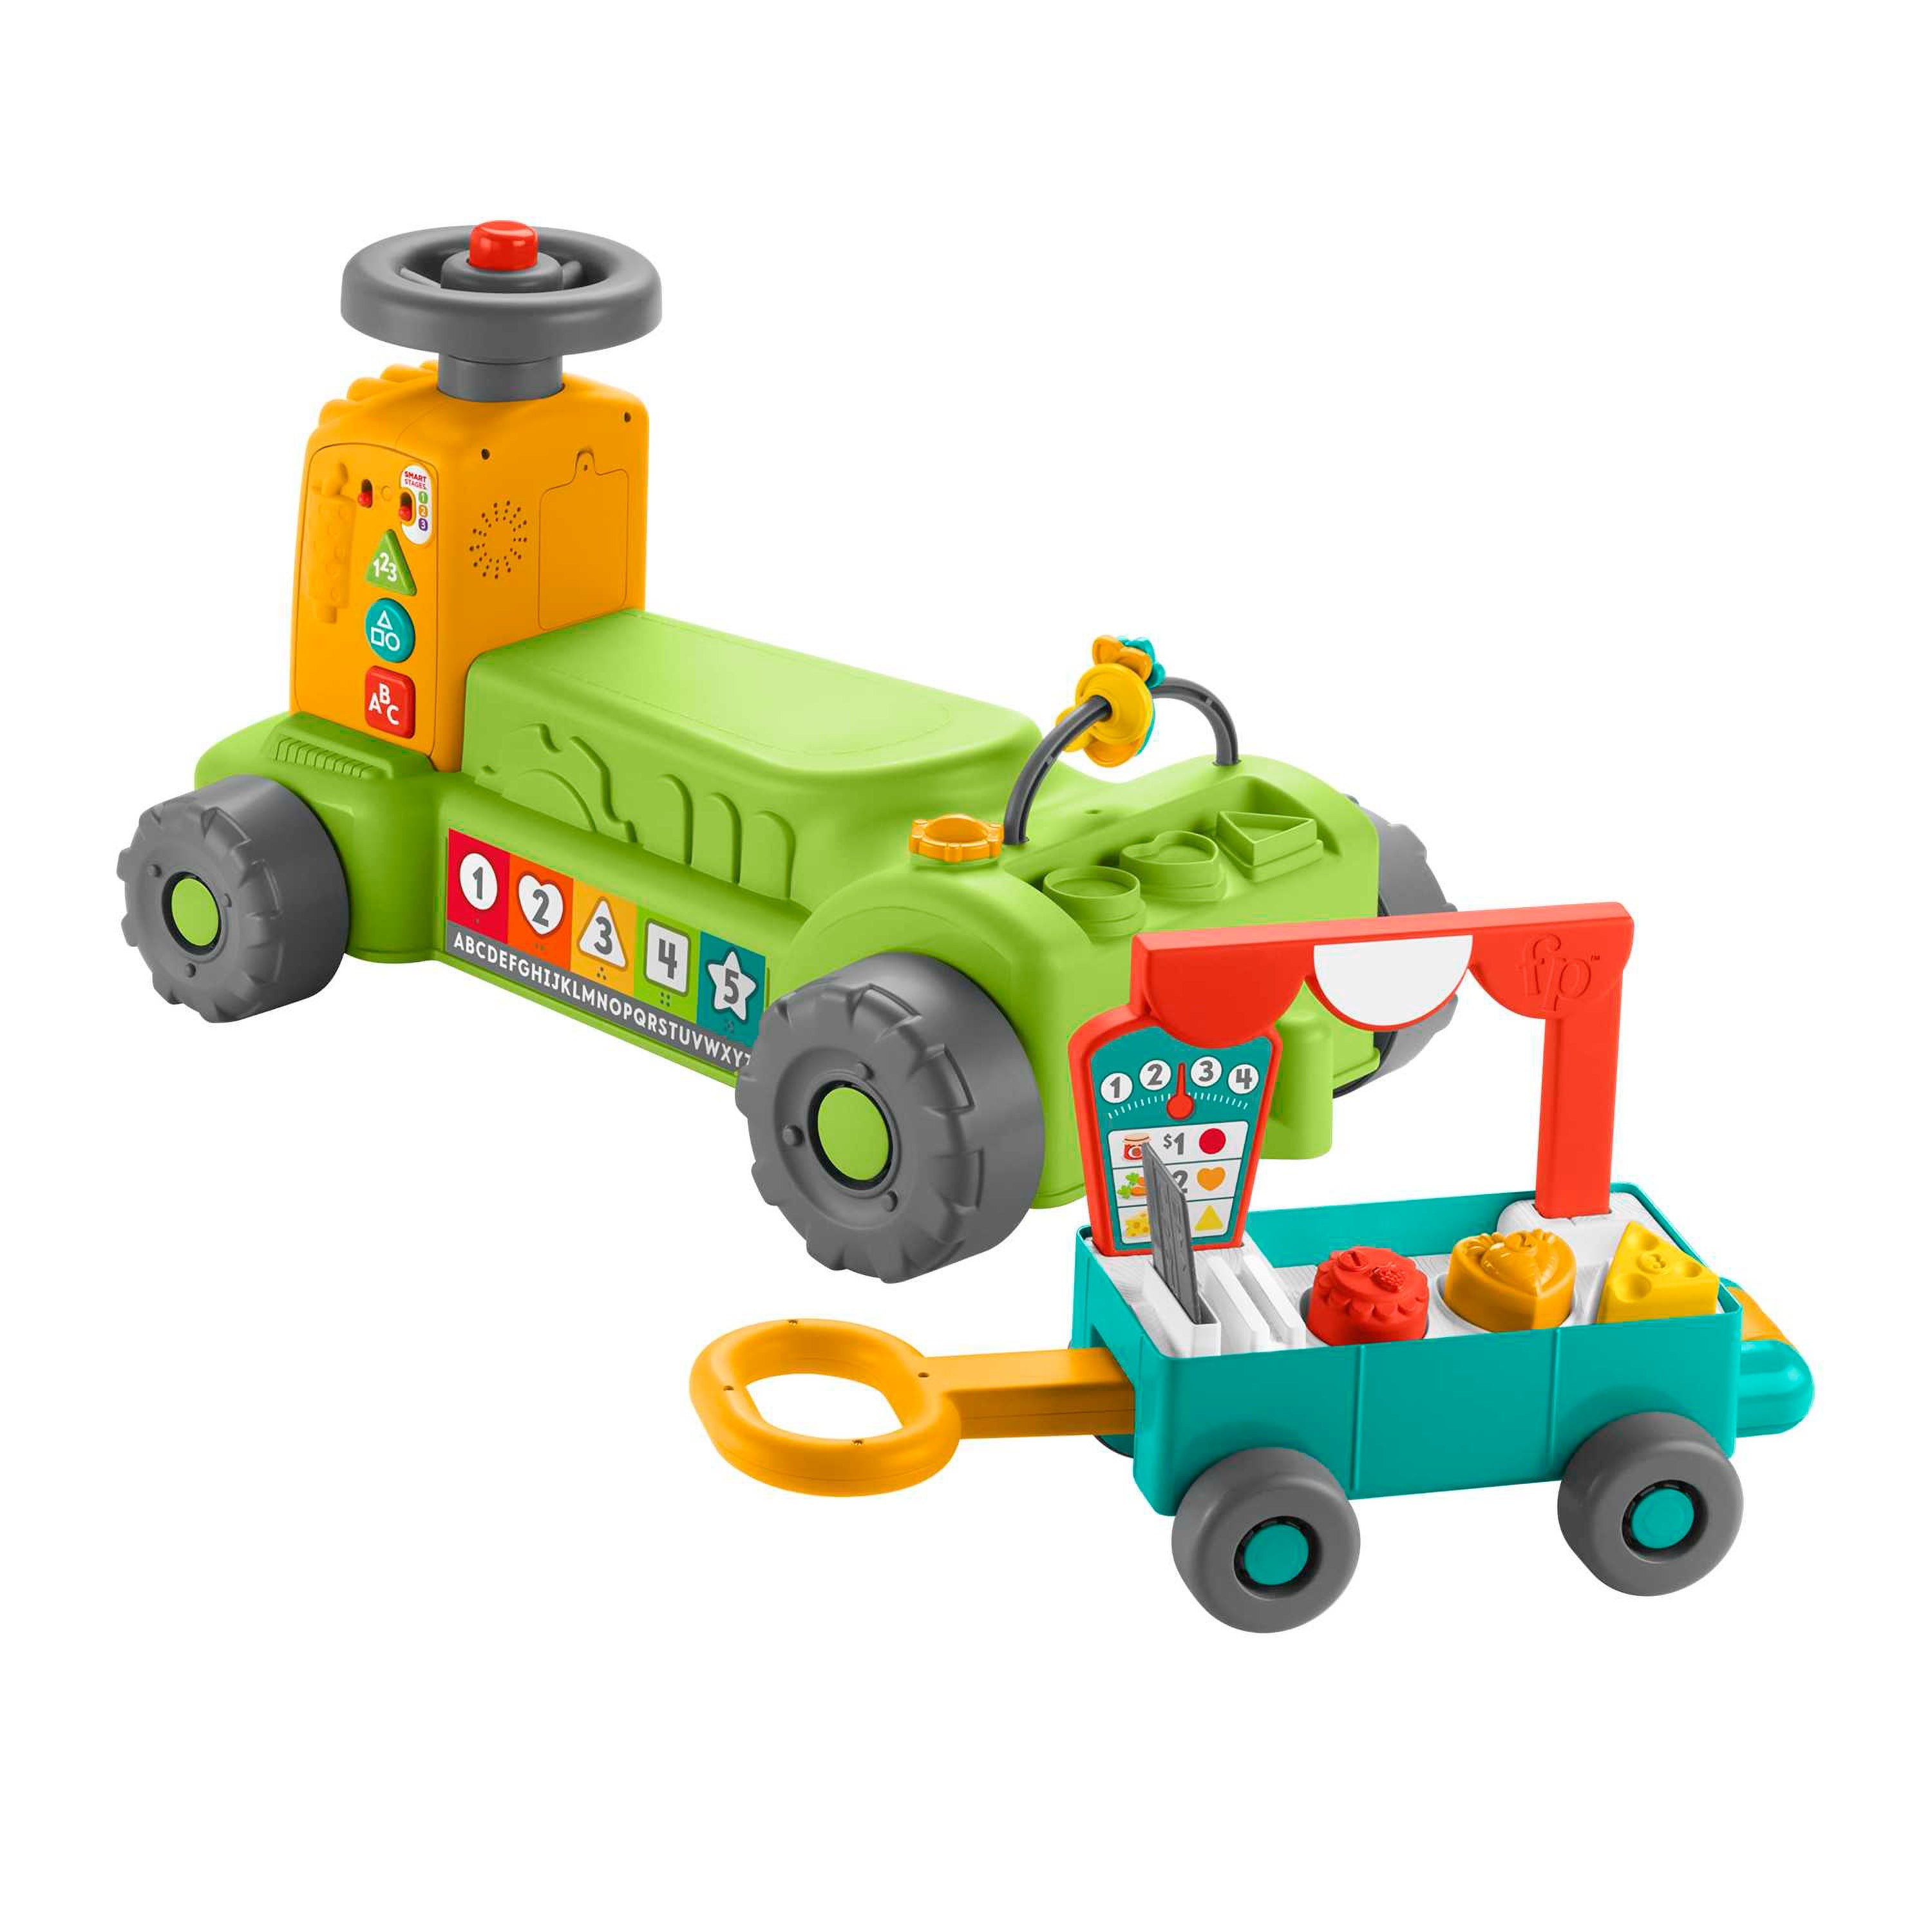 Laugh & Learn 4-in-1 Farm to Market Tractor